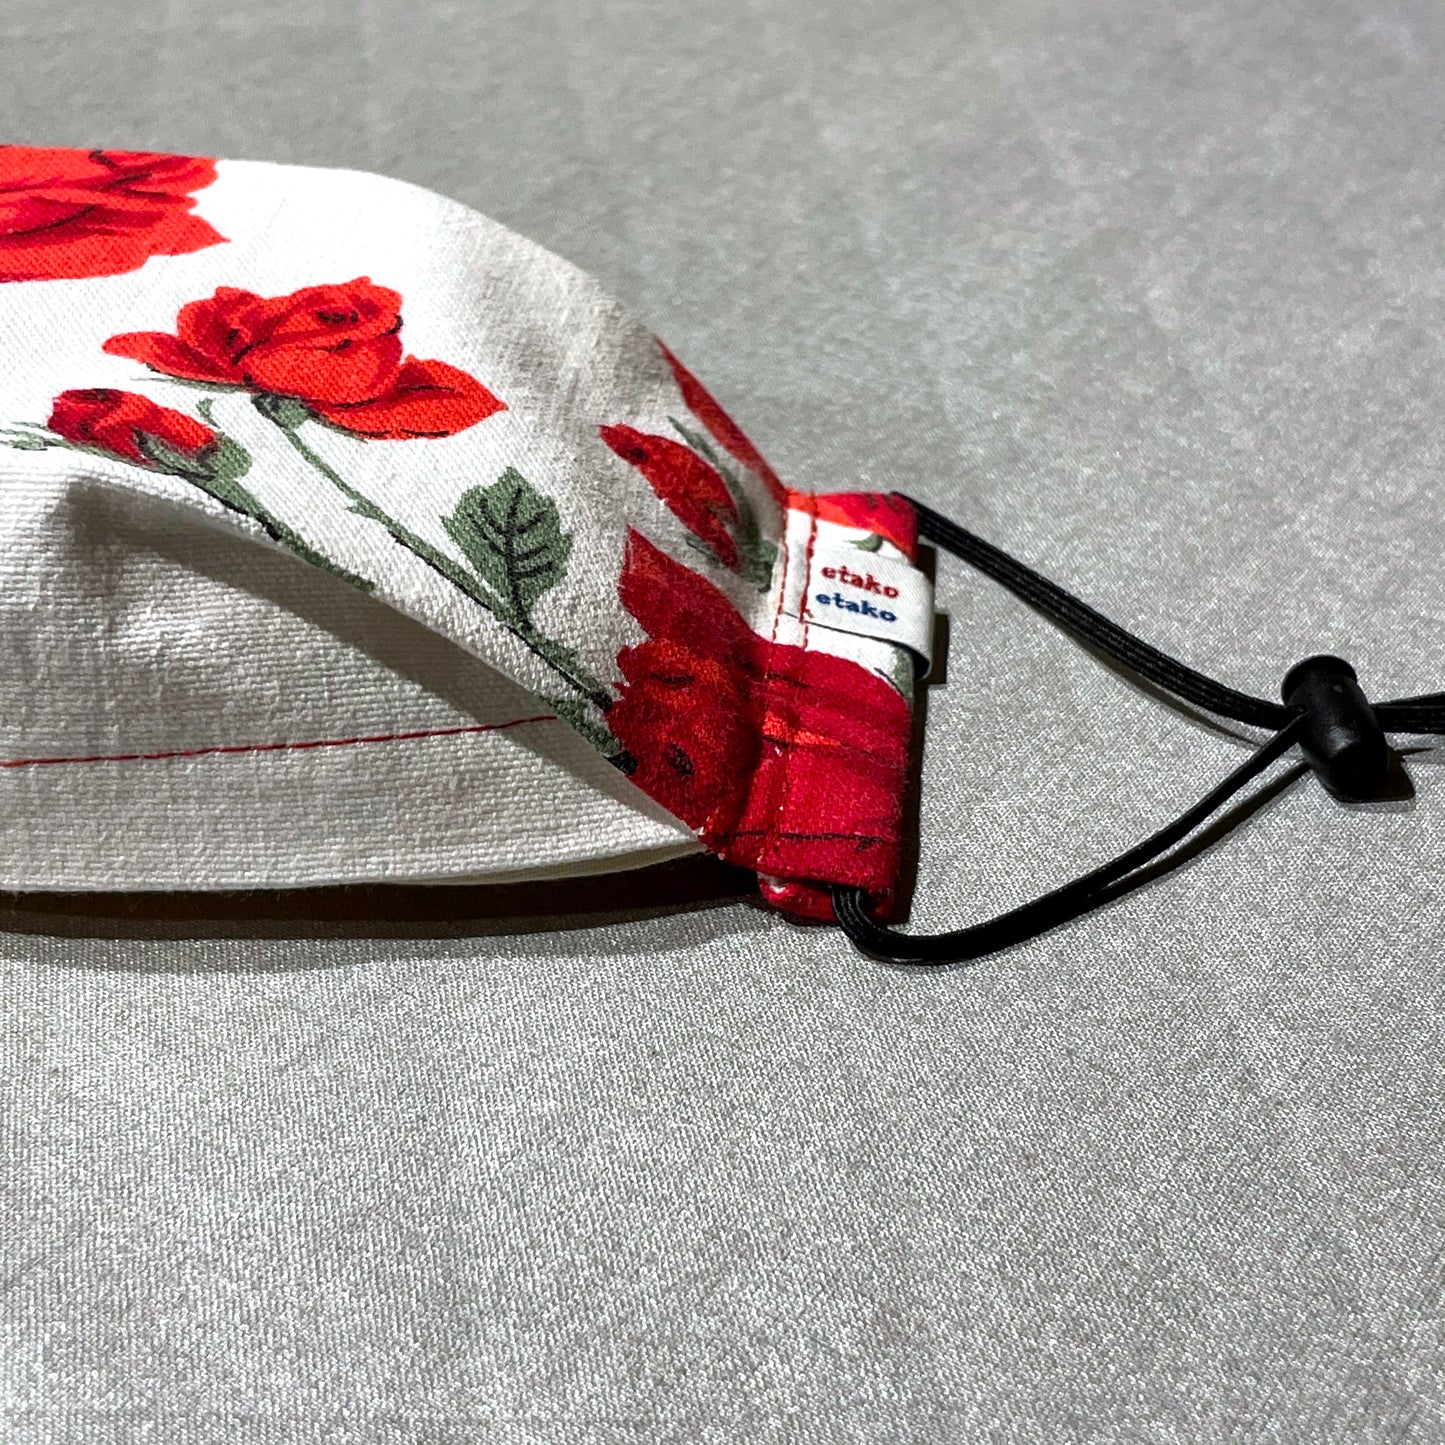 Cotton Face Mask - Vintage Red Rose Fabric